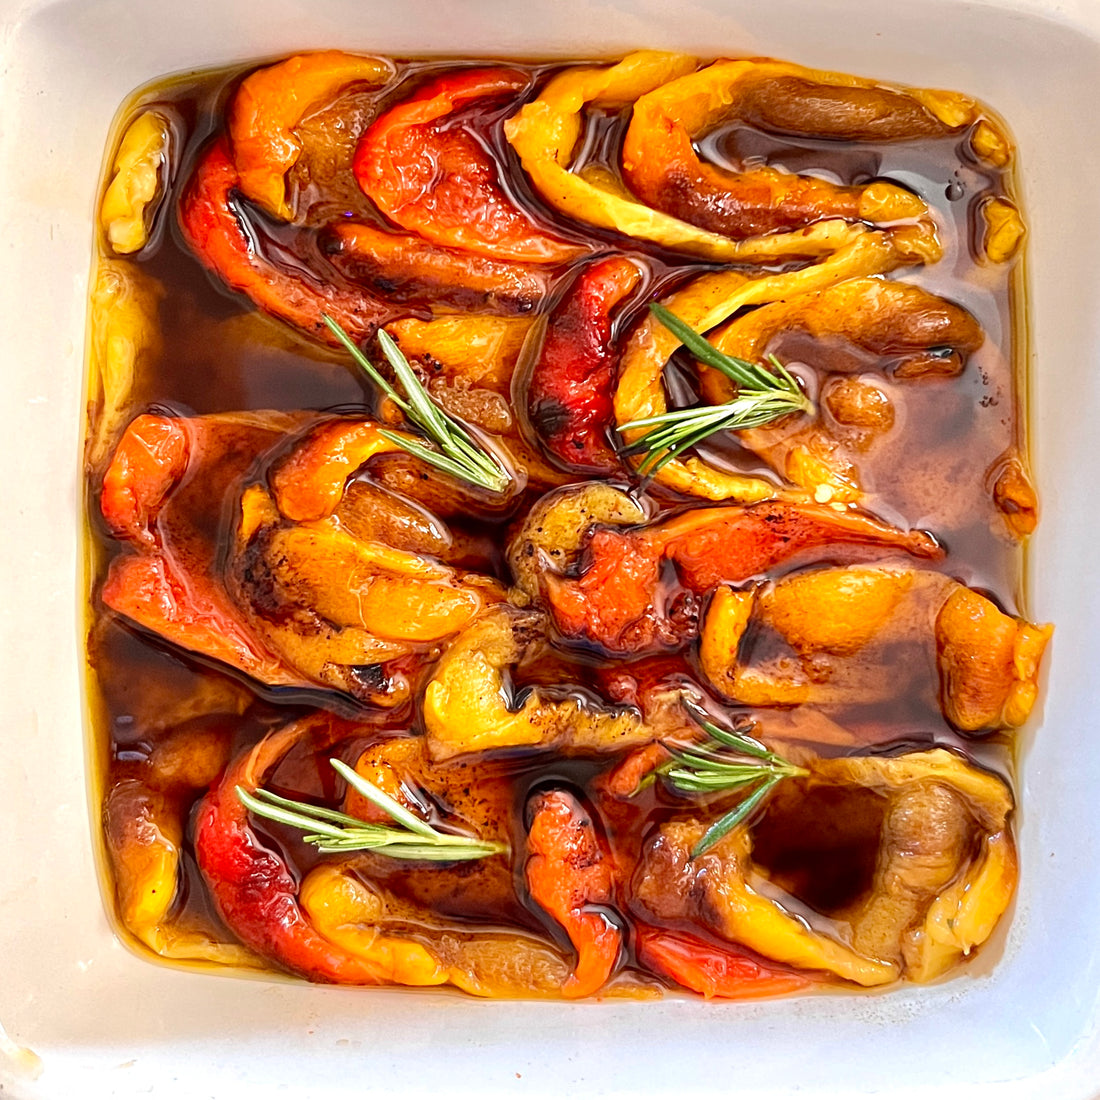 Brightly colored roasted peppers marinating in Il Bel Cuore Olive Oil